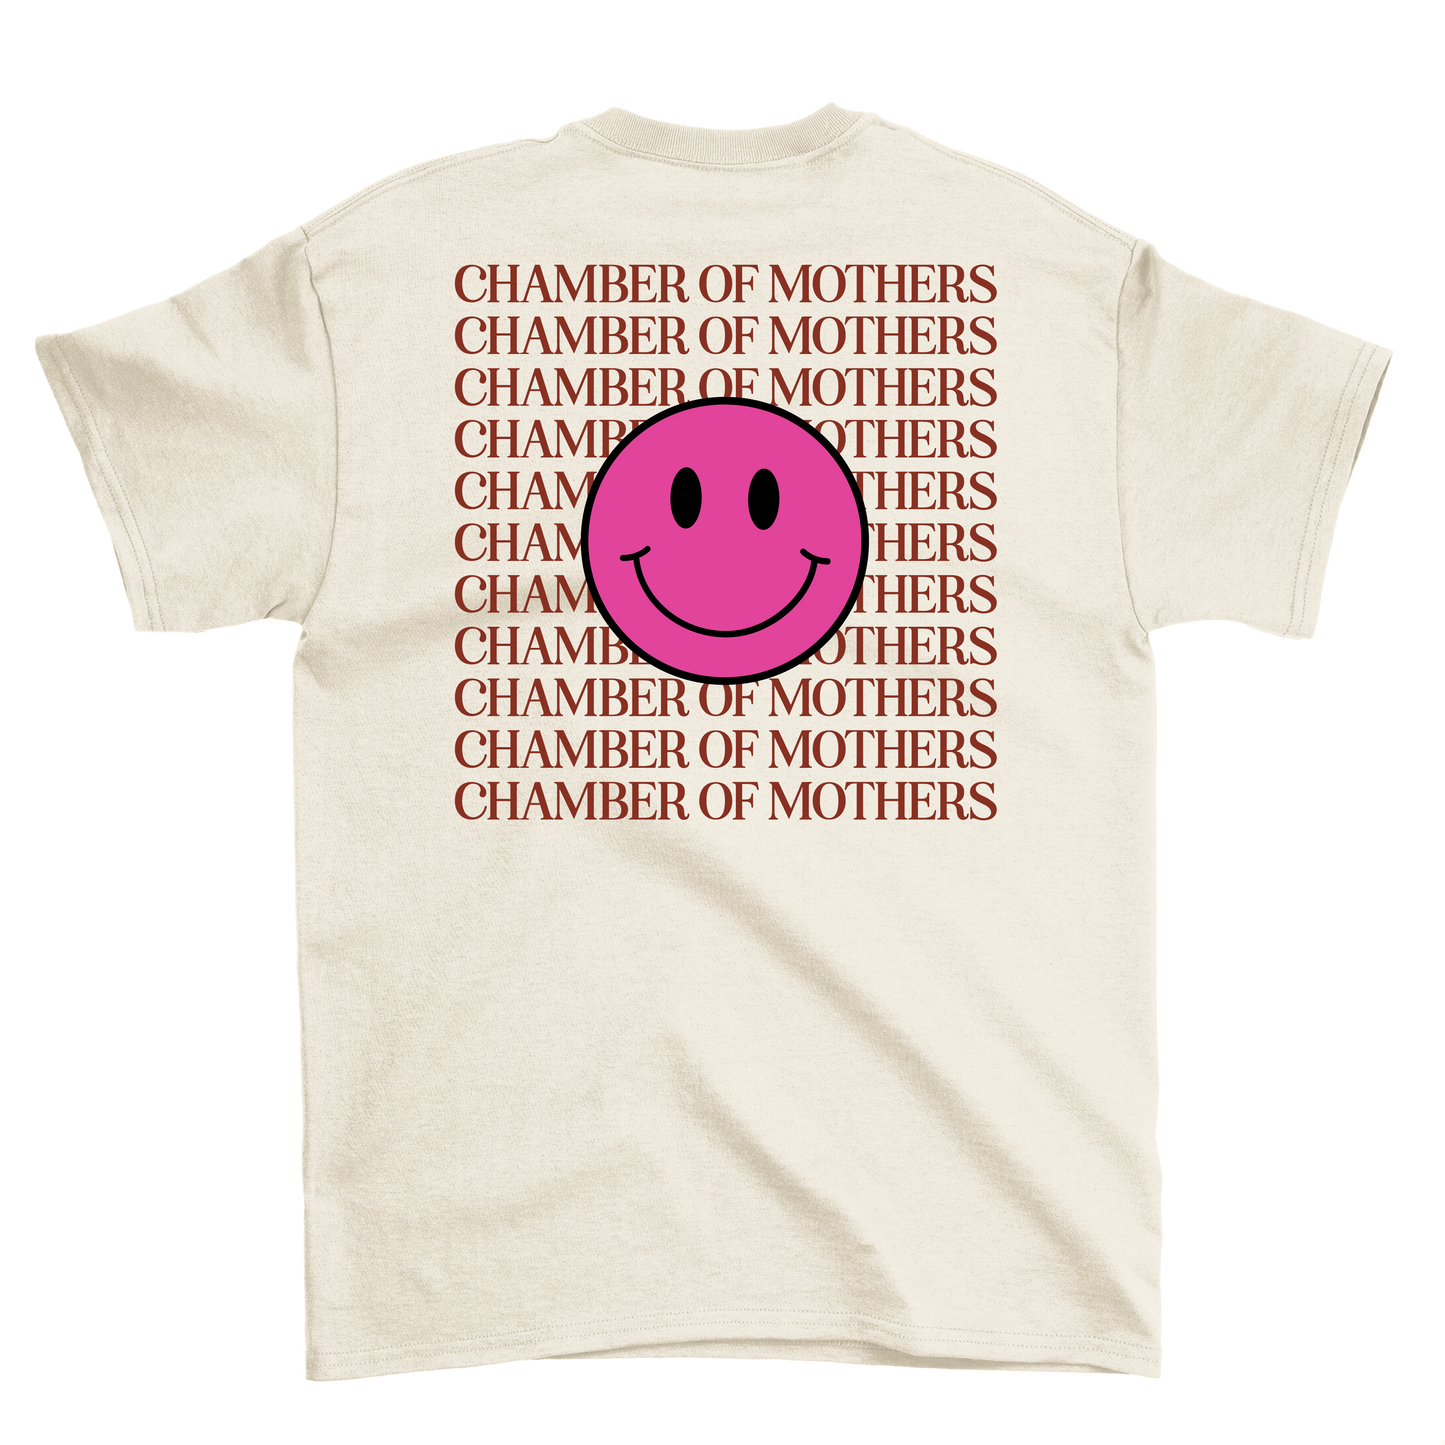 Chamber of Mothers Tee